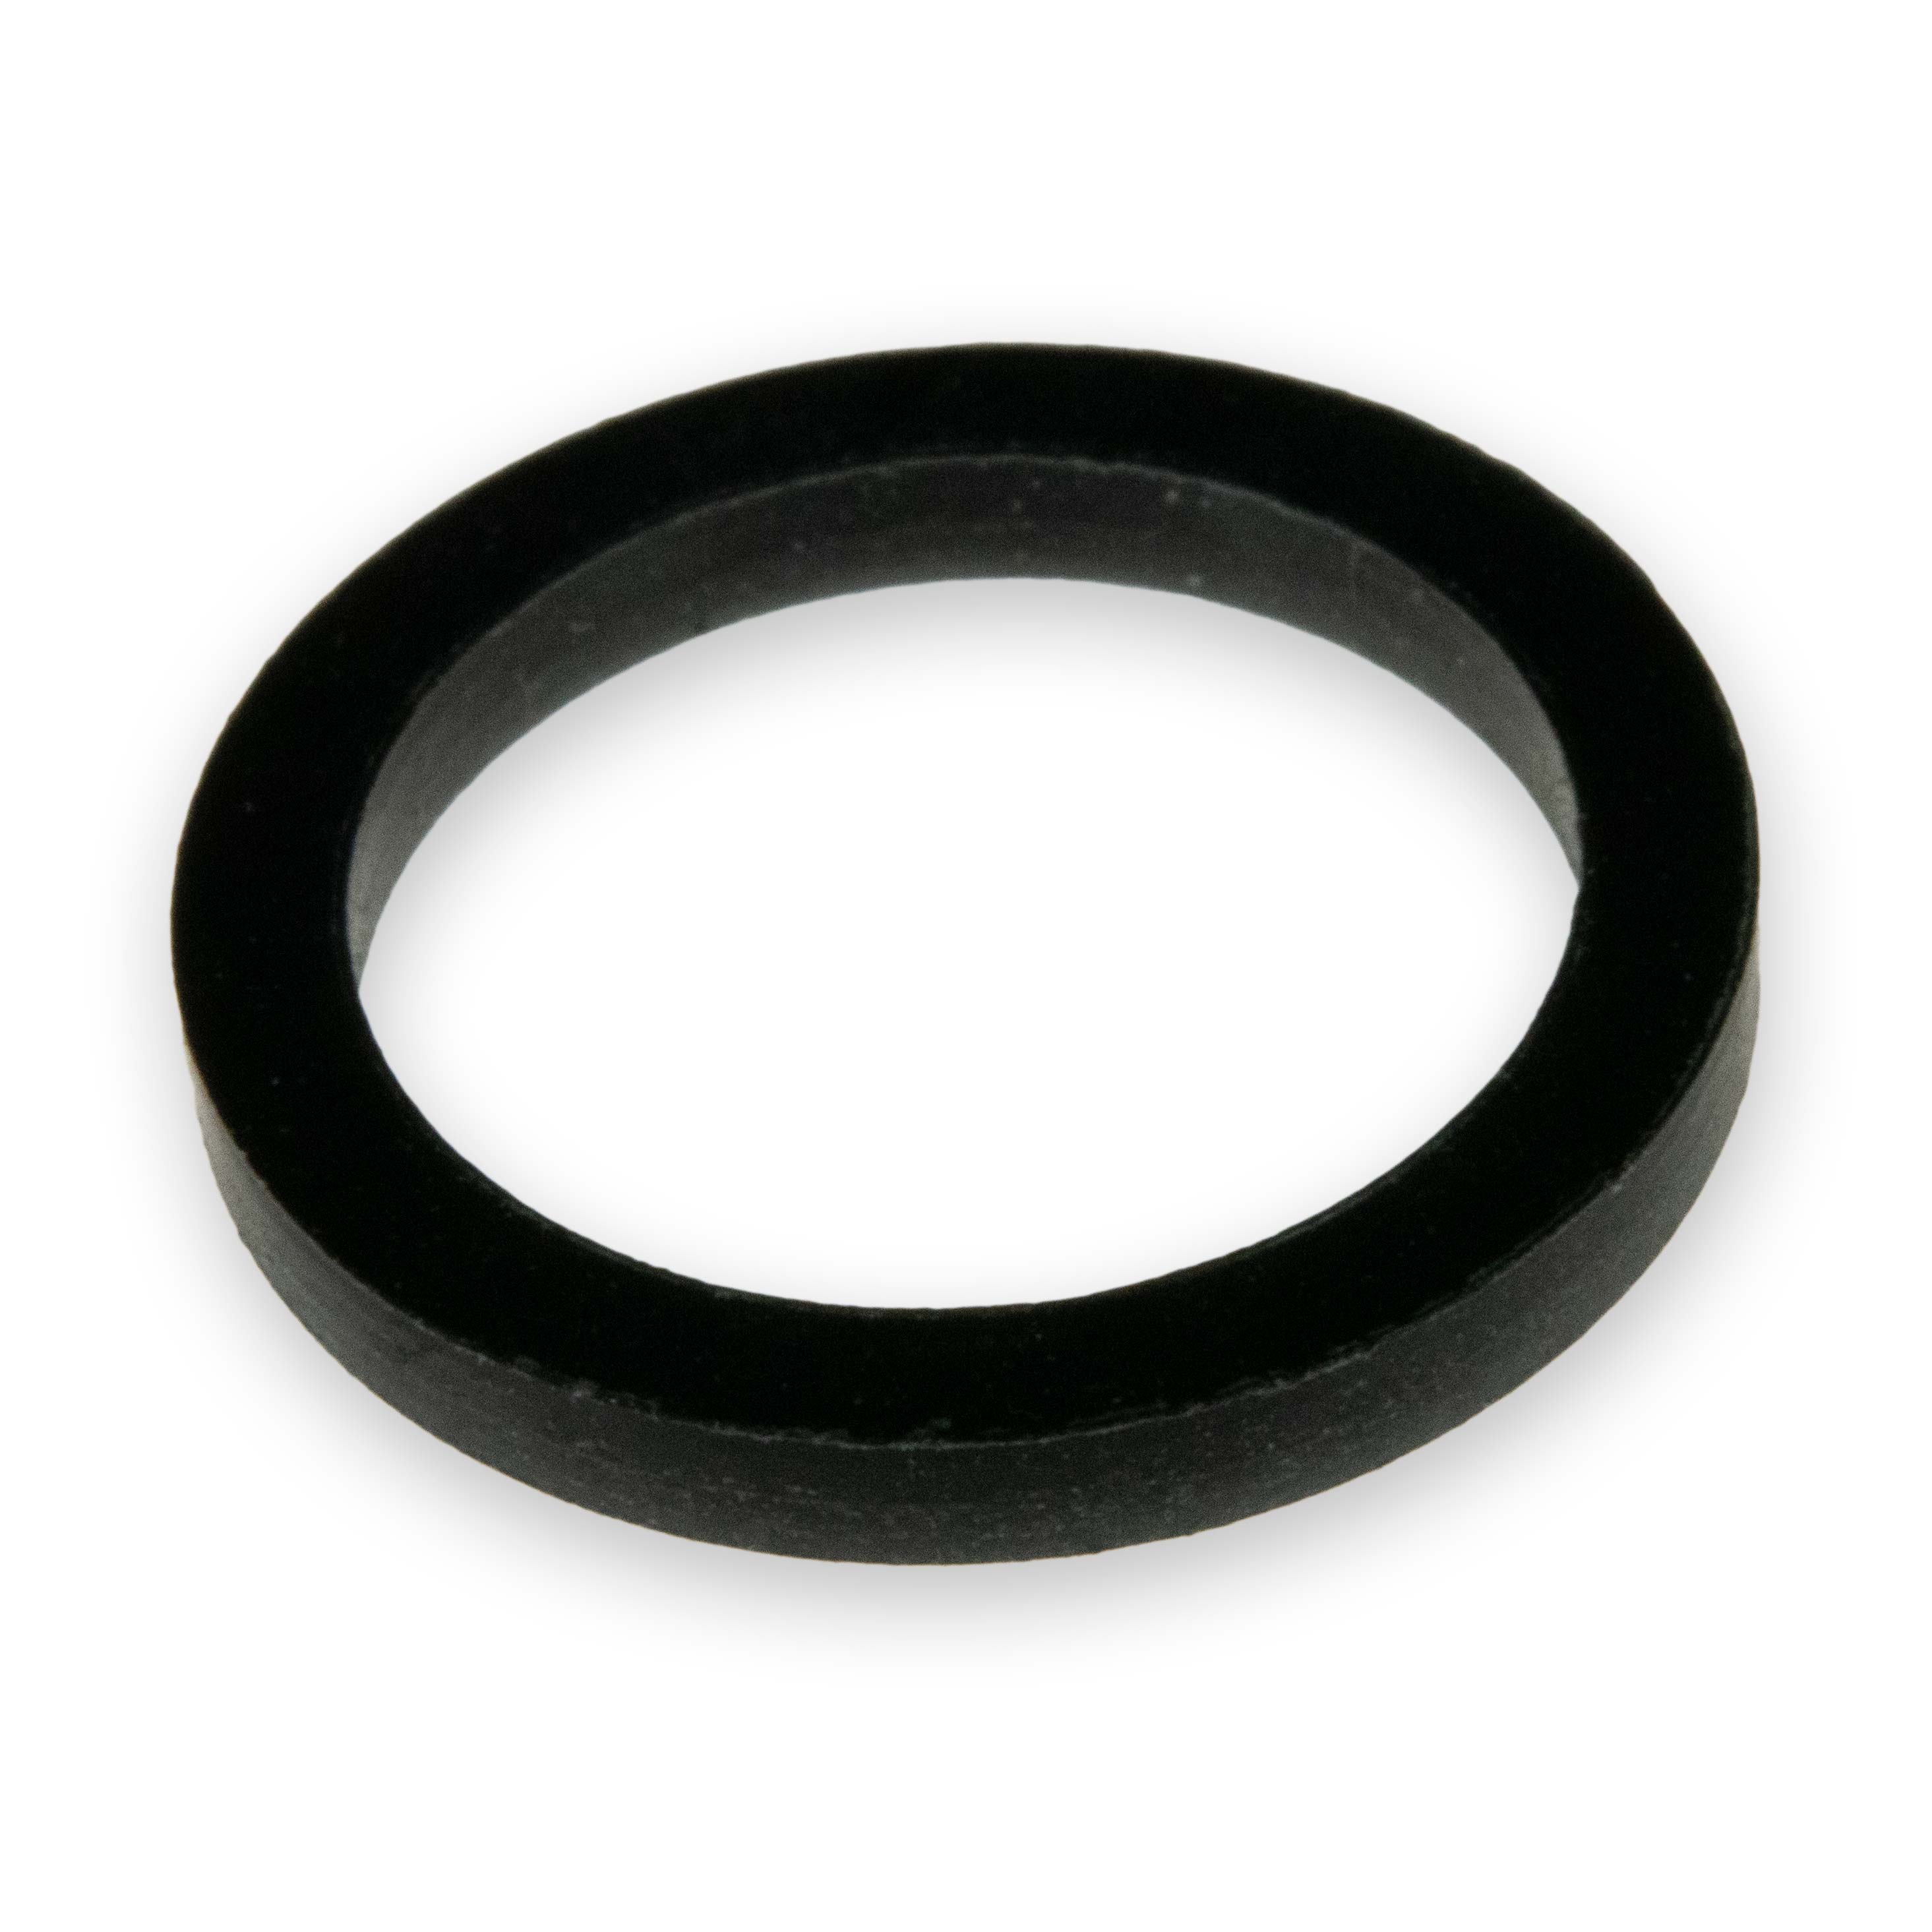 Sealing ring made of rigid PVC, durable up to 70 °C